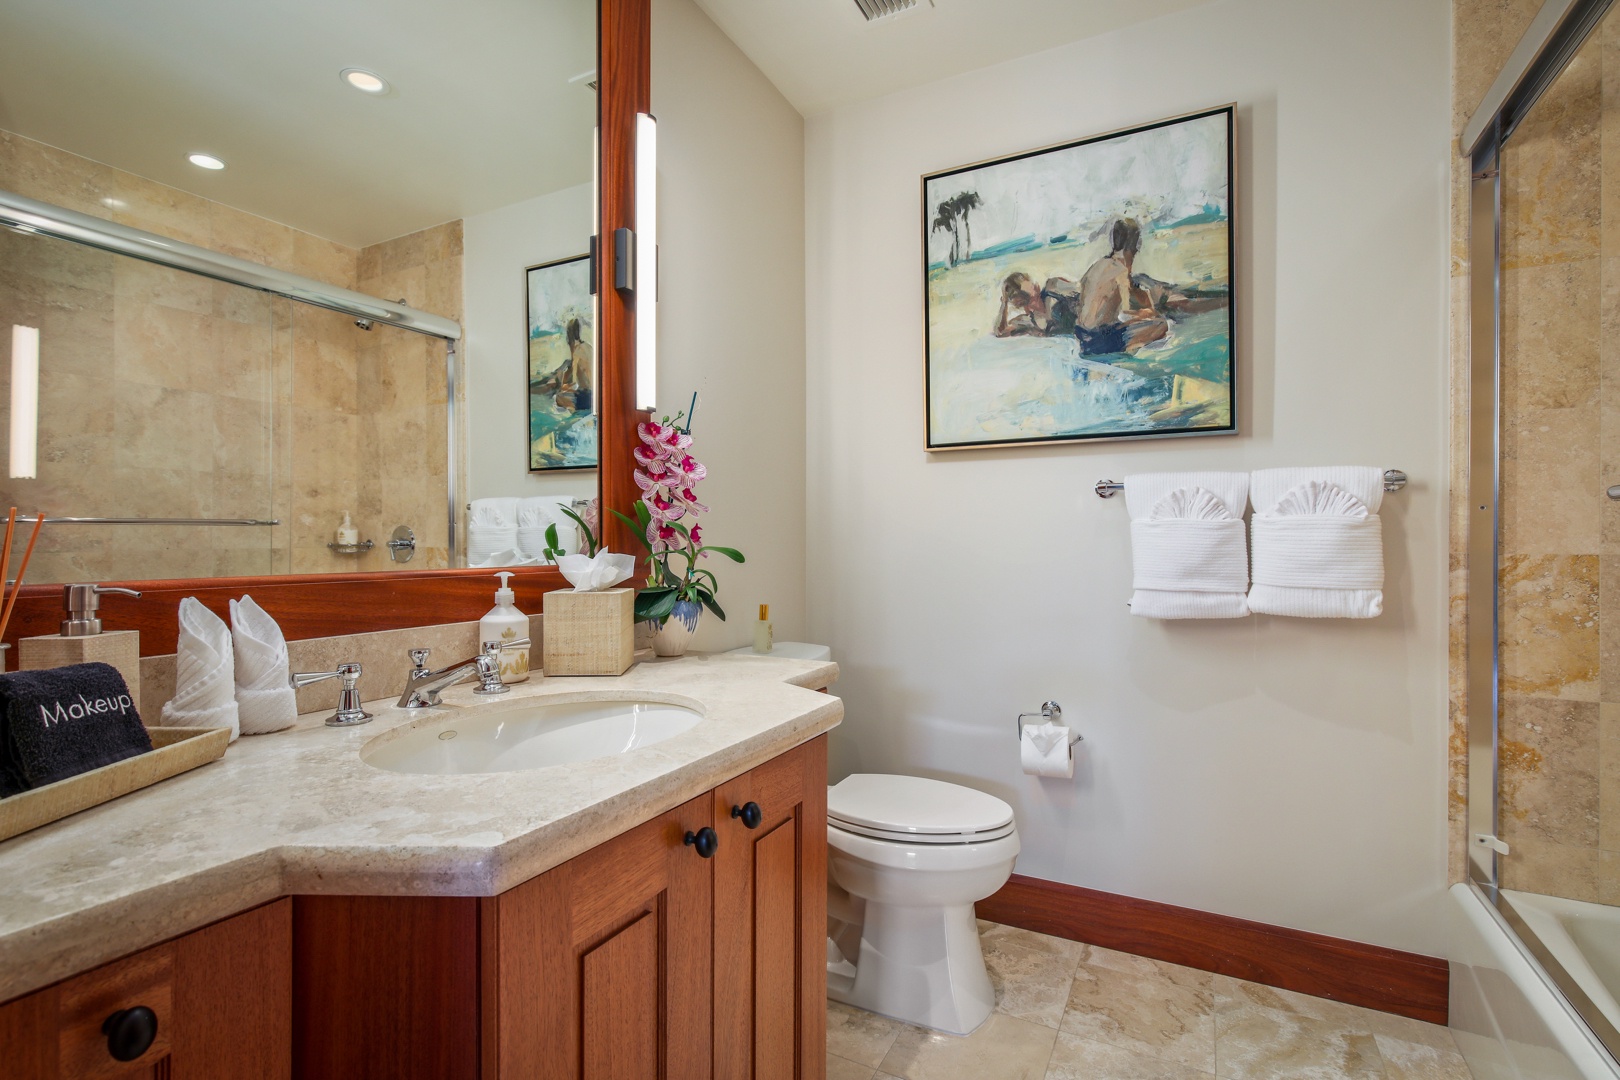 Kailua Kona Vacation Rentals, 4BD Hainoa Estate (122) at Four Seasons Resort at Hualalai - Full en suite bath in Guest Room 2 with tub/shower combo.